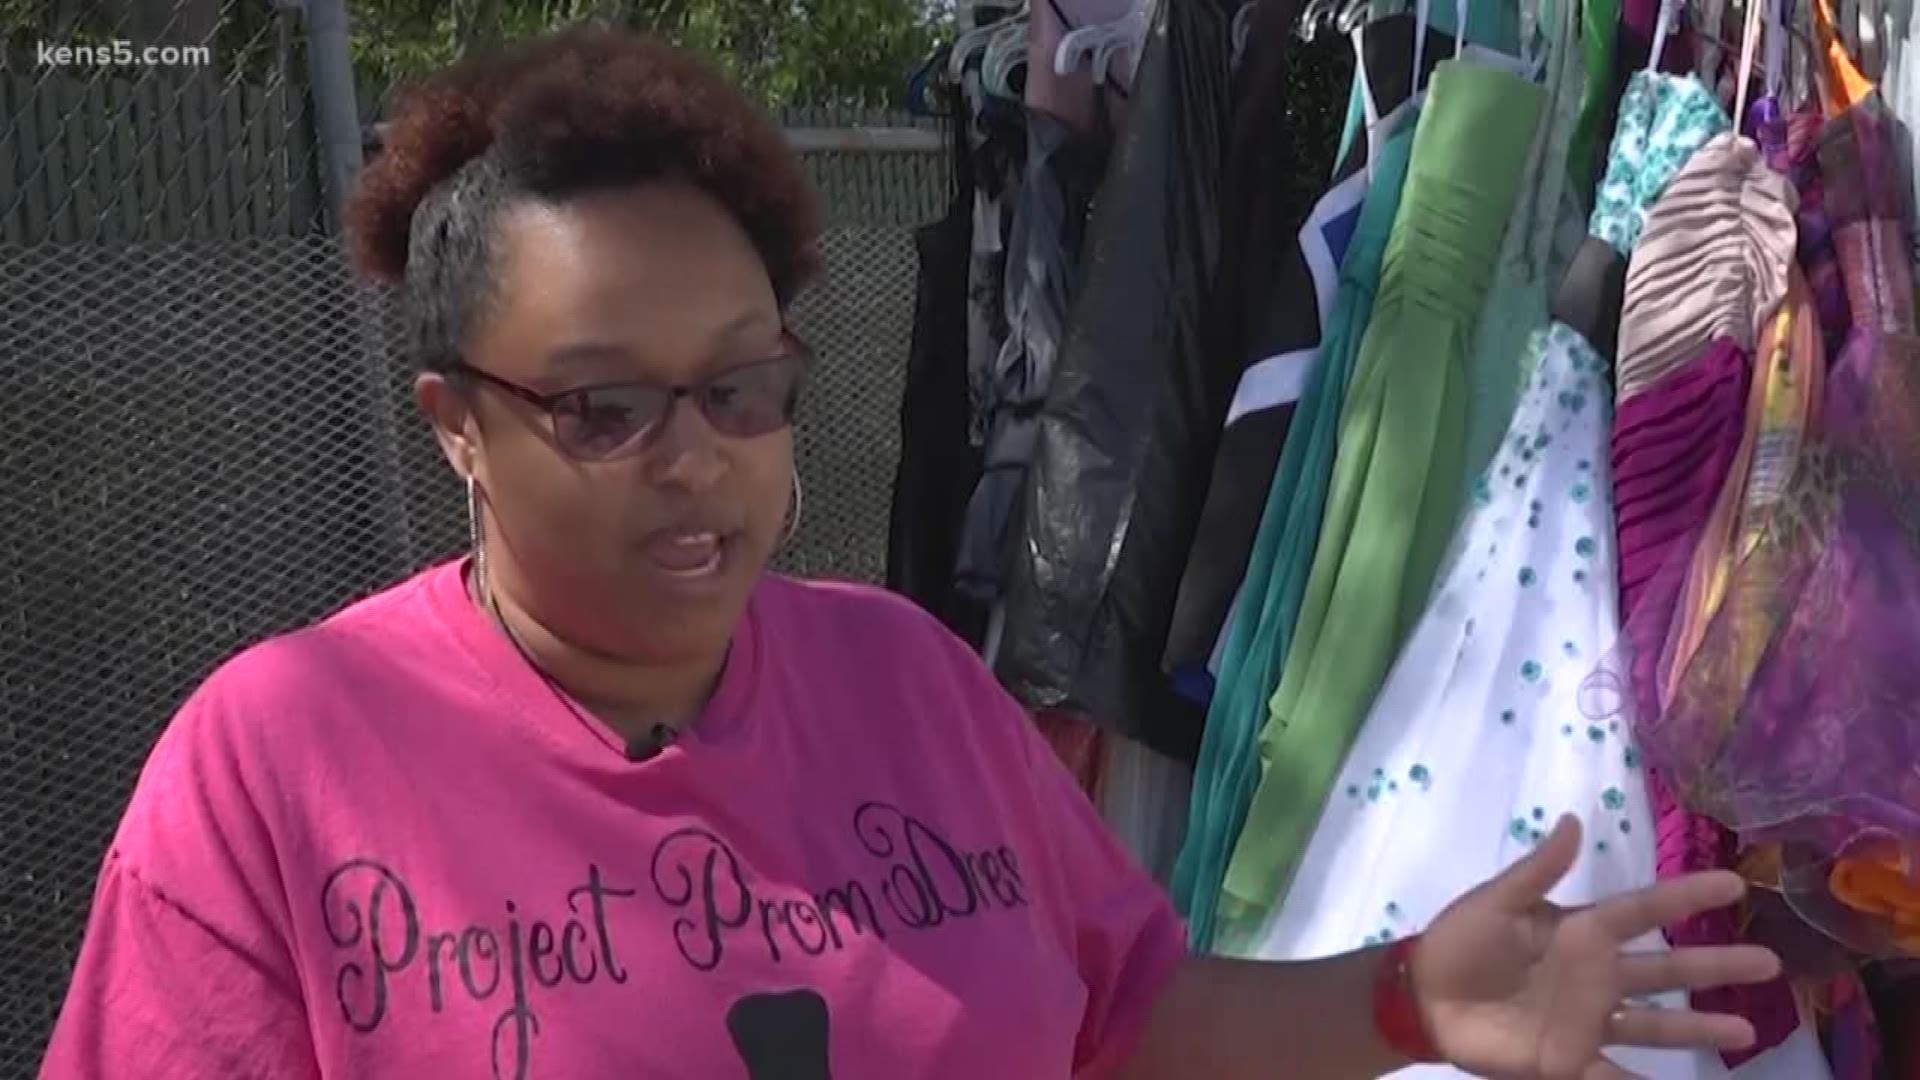 A local mom is on a mission to make prom magical for every San Antonio teen.